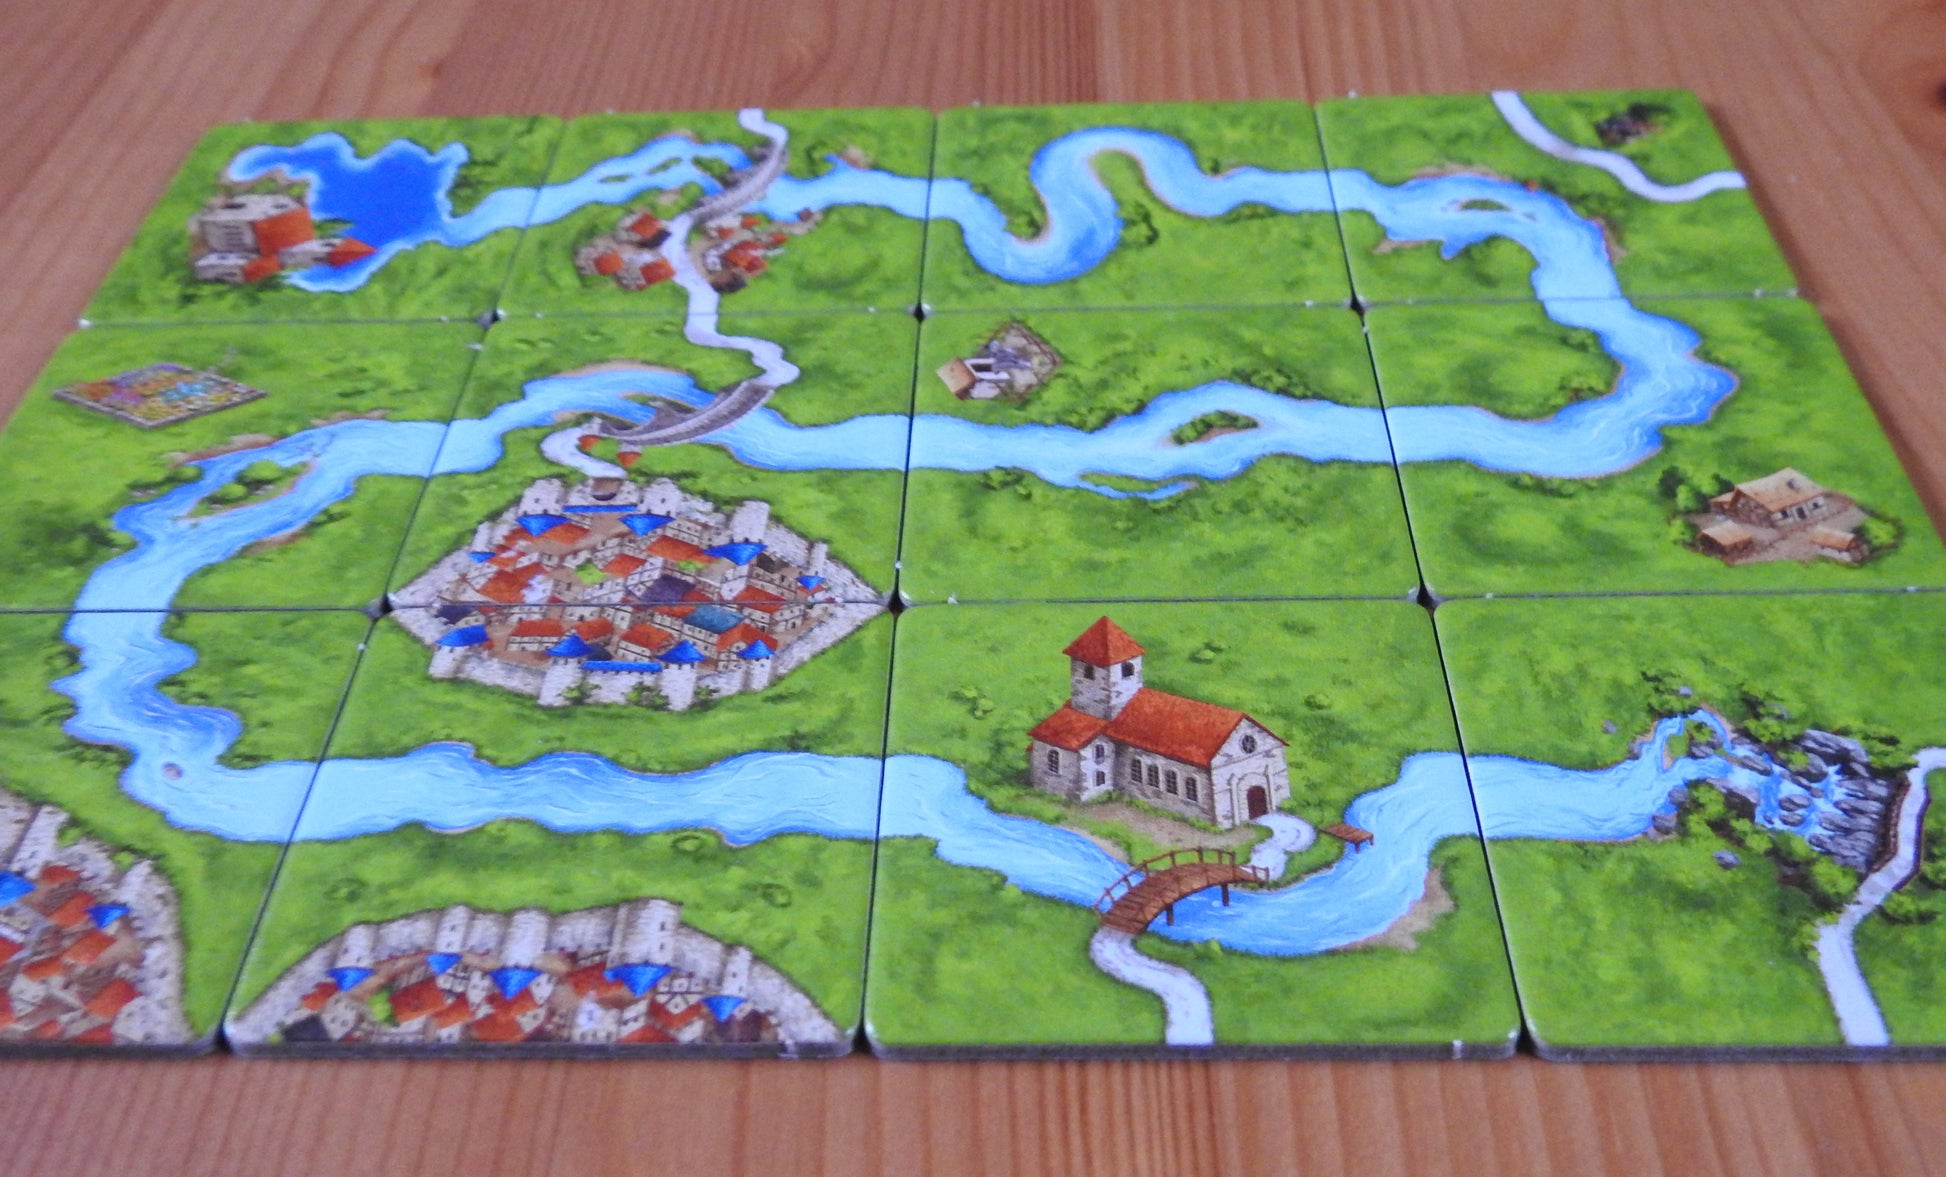 A further view of all the 12 included tiles in this River I mini expansion for Carcassonne.